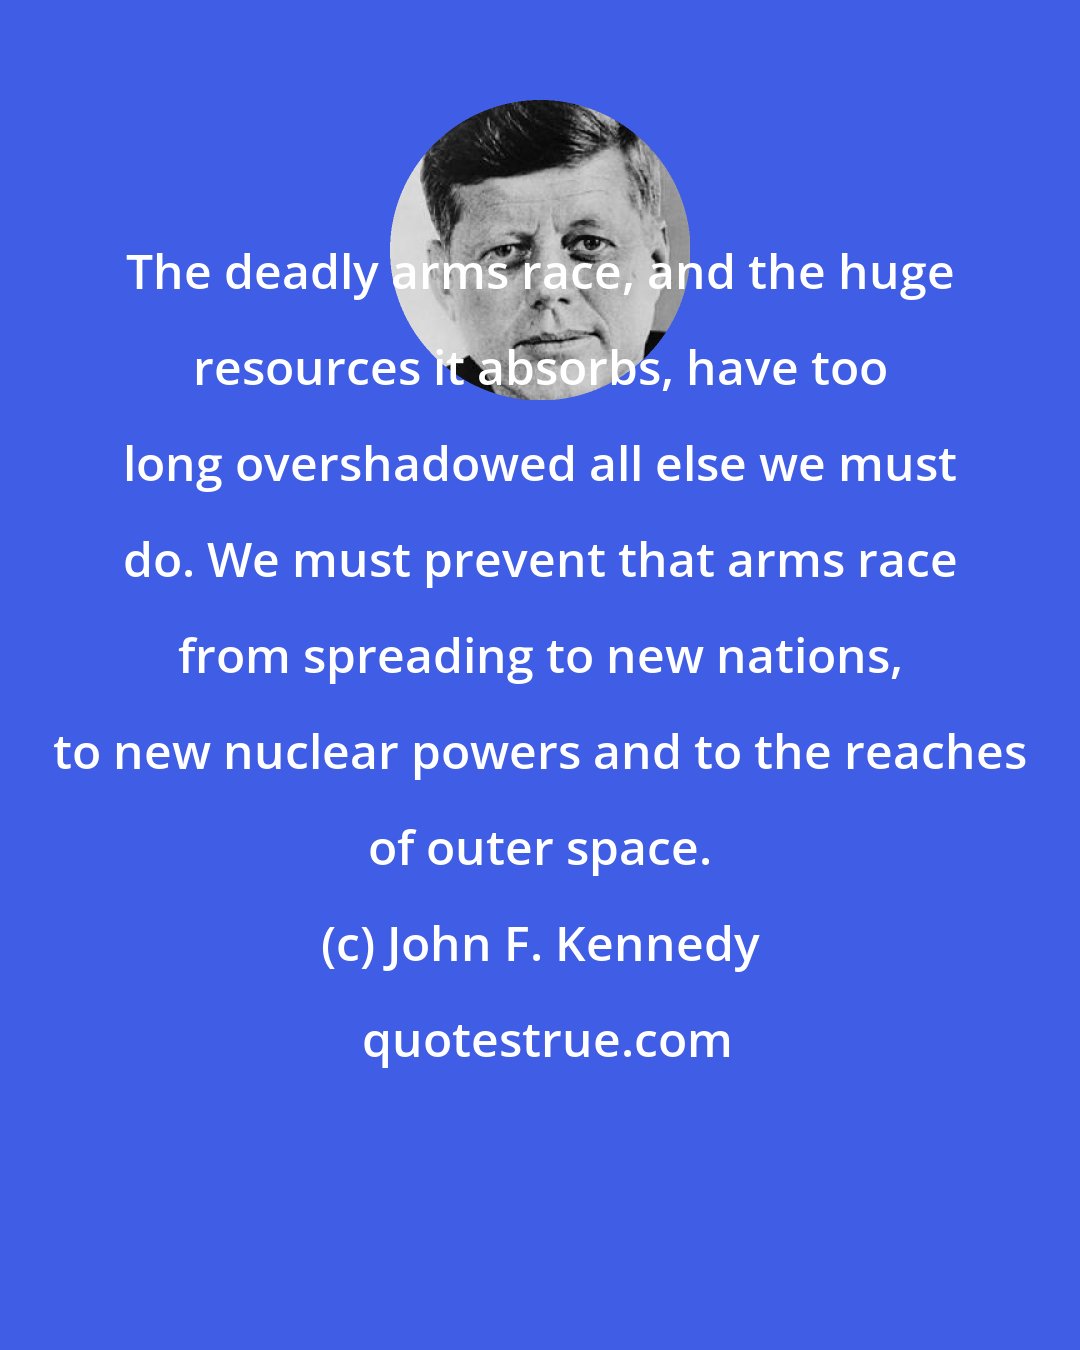 John F. Kennedy: The deadly arms race, and the huge resources it absorbs, have too long overshadowed all else we must do. We must prevent that arms race from spreading to new nations, to new nuclear powers and to the reaches of outer space.